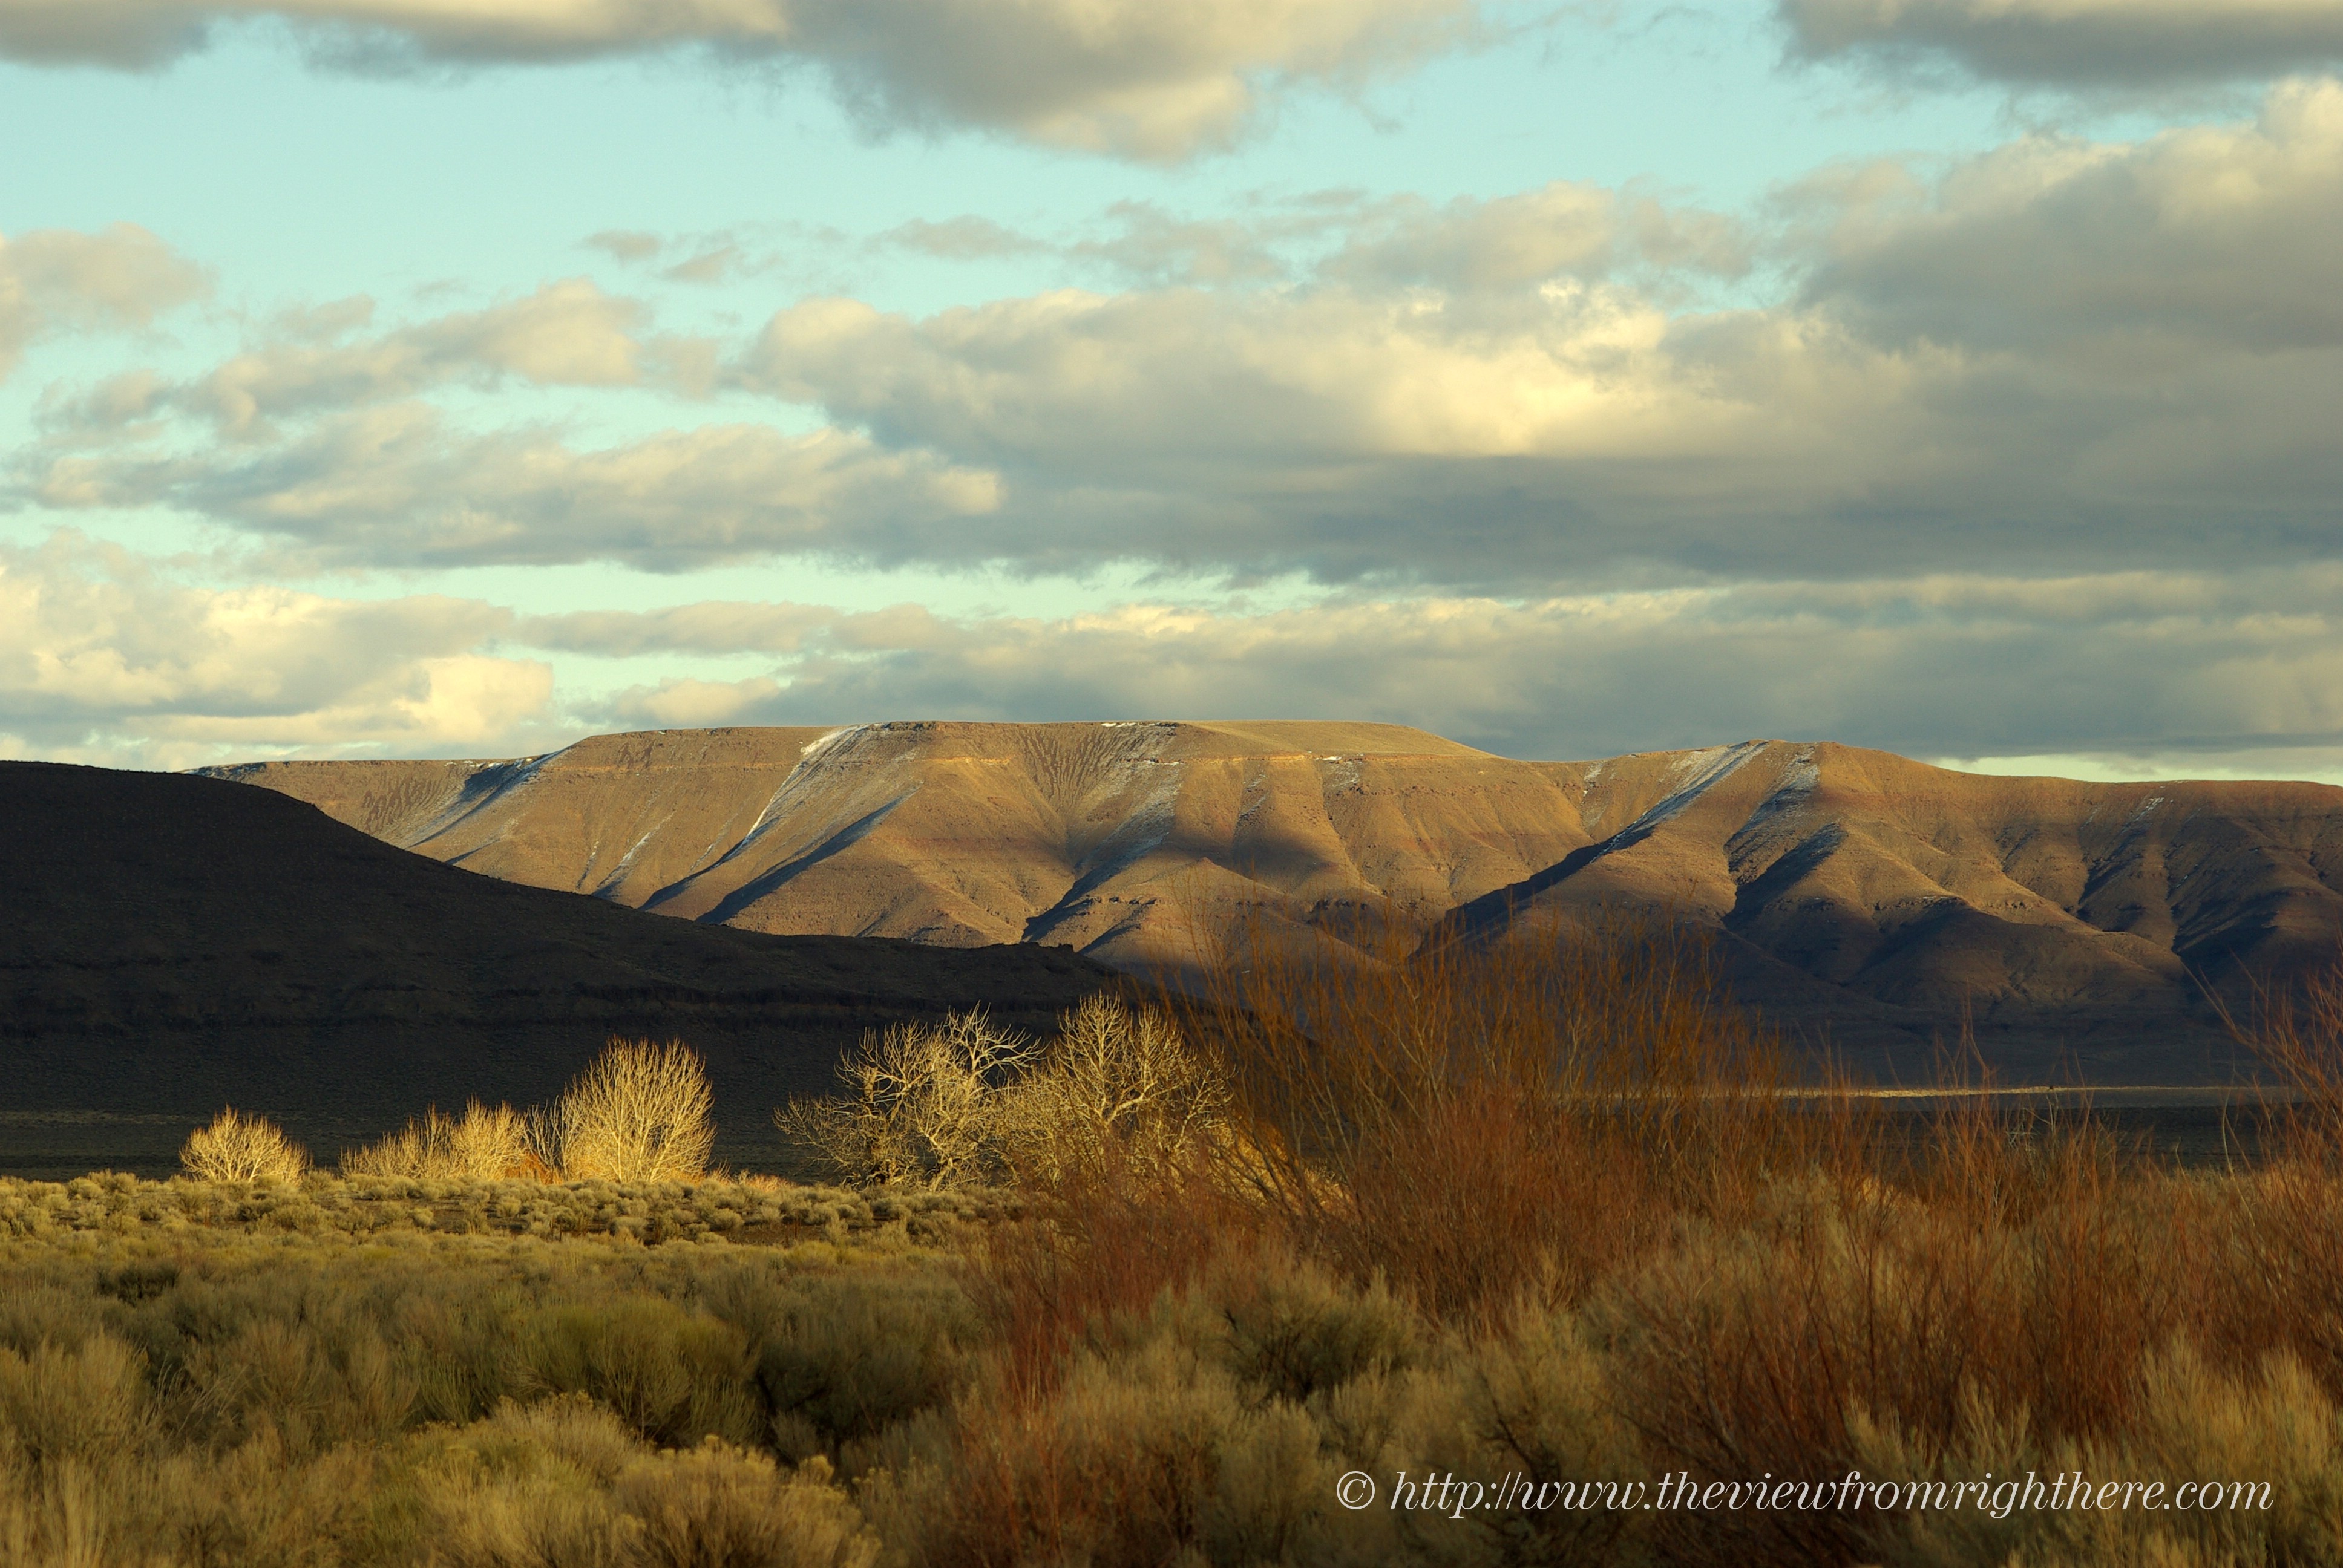 Sheepshead Mountains Bask in Afternoon Light